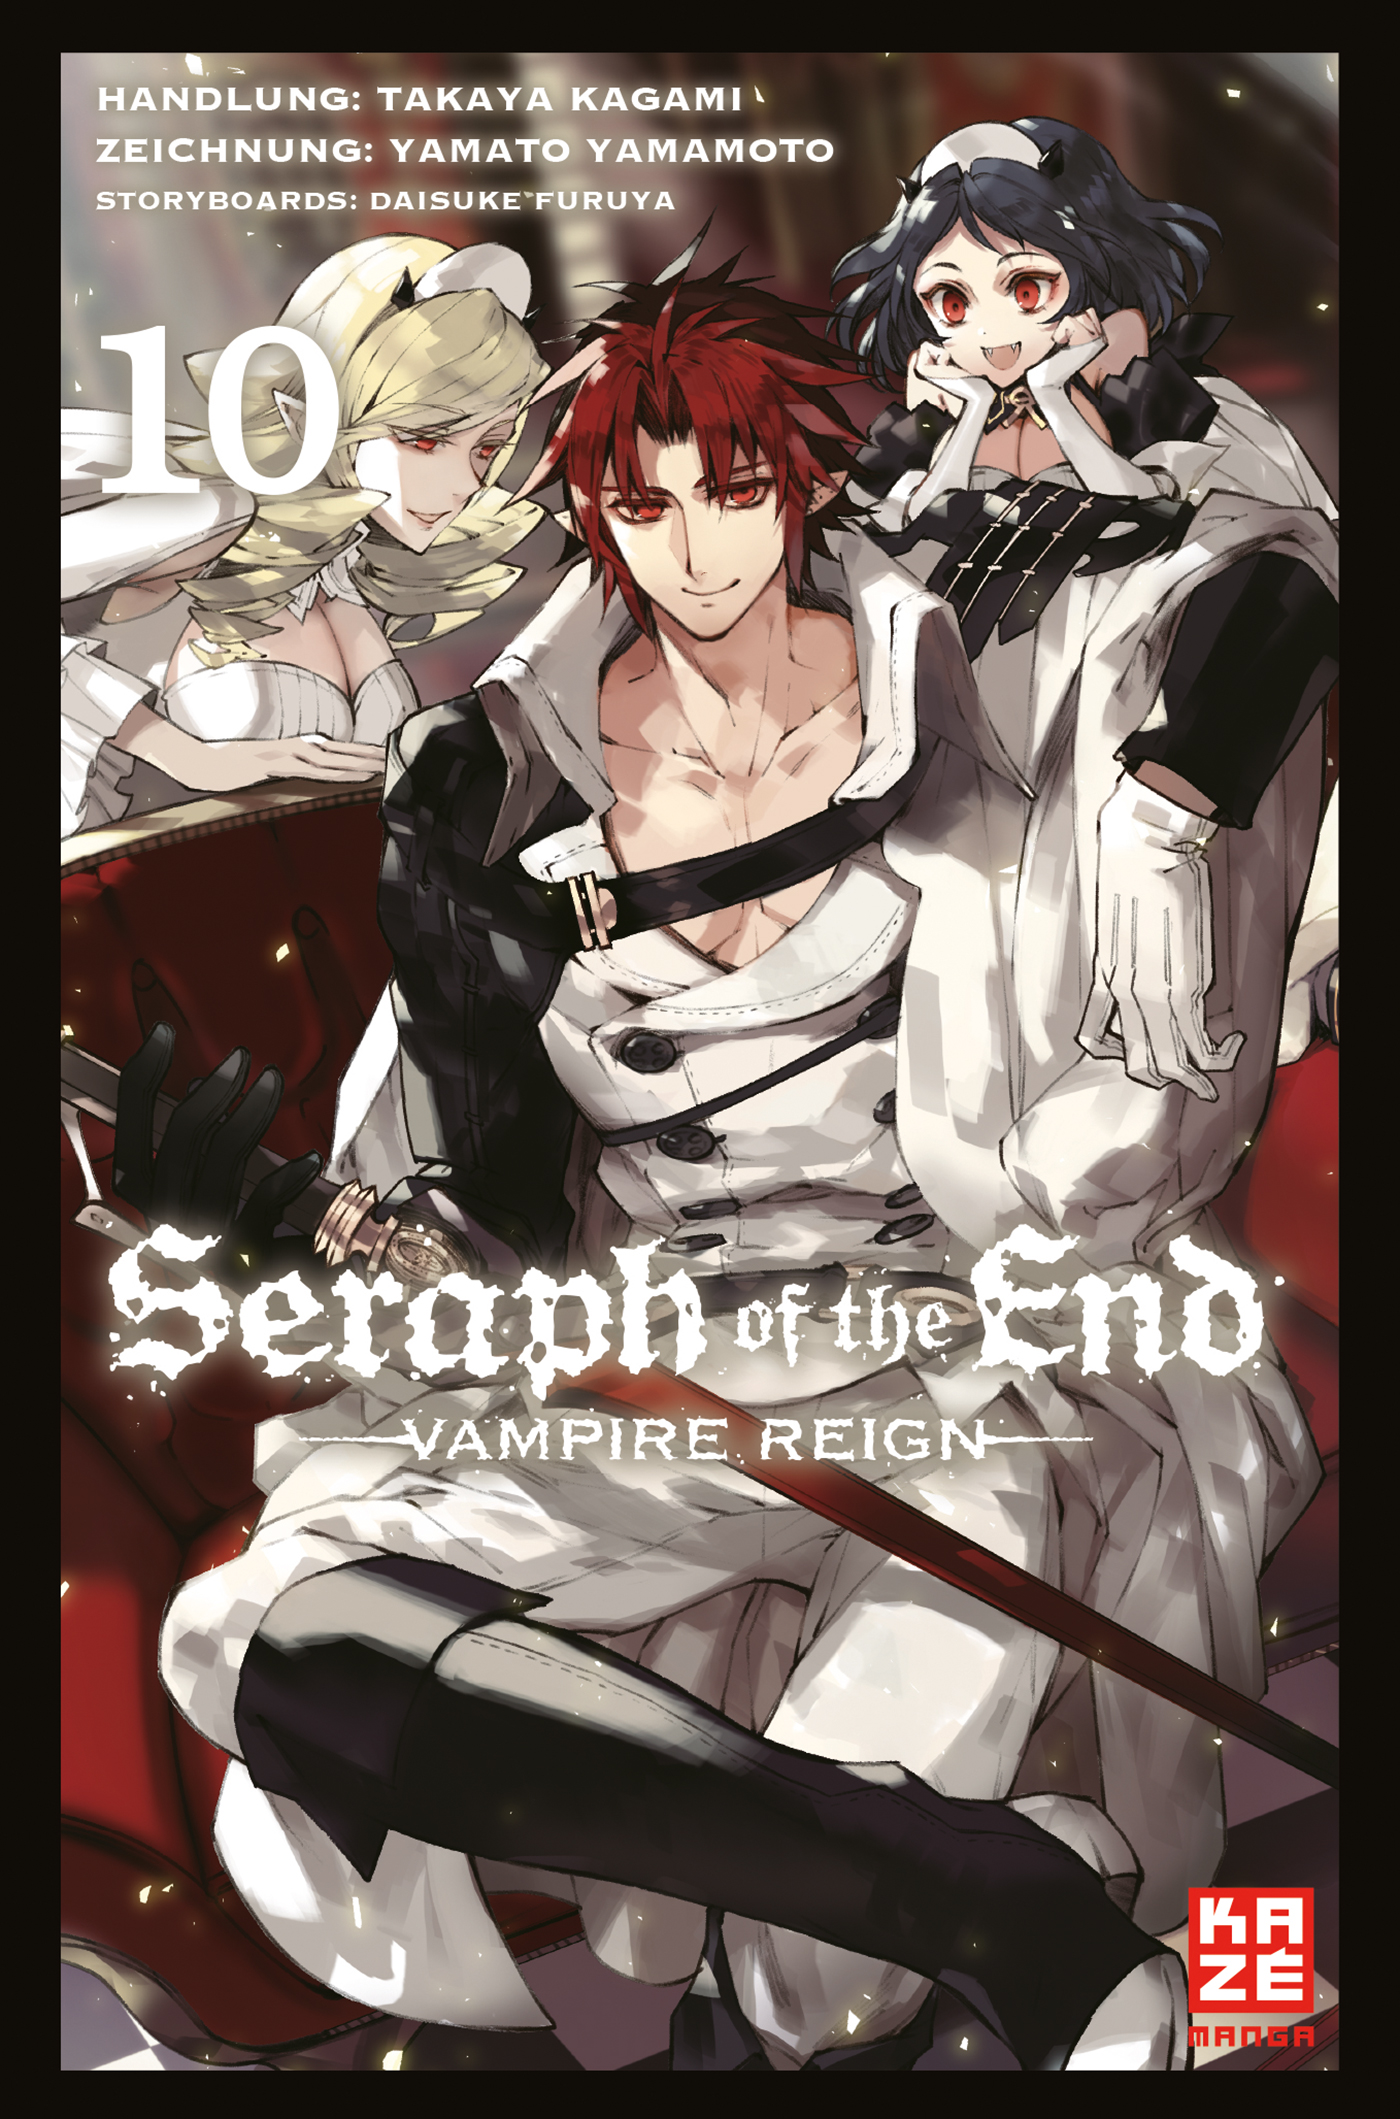 – End 10 the of Band Seraph